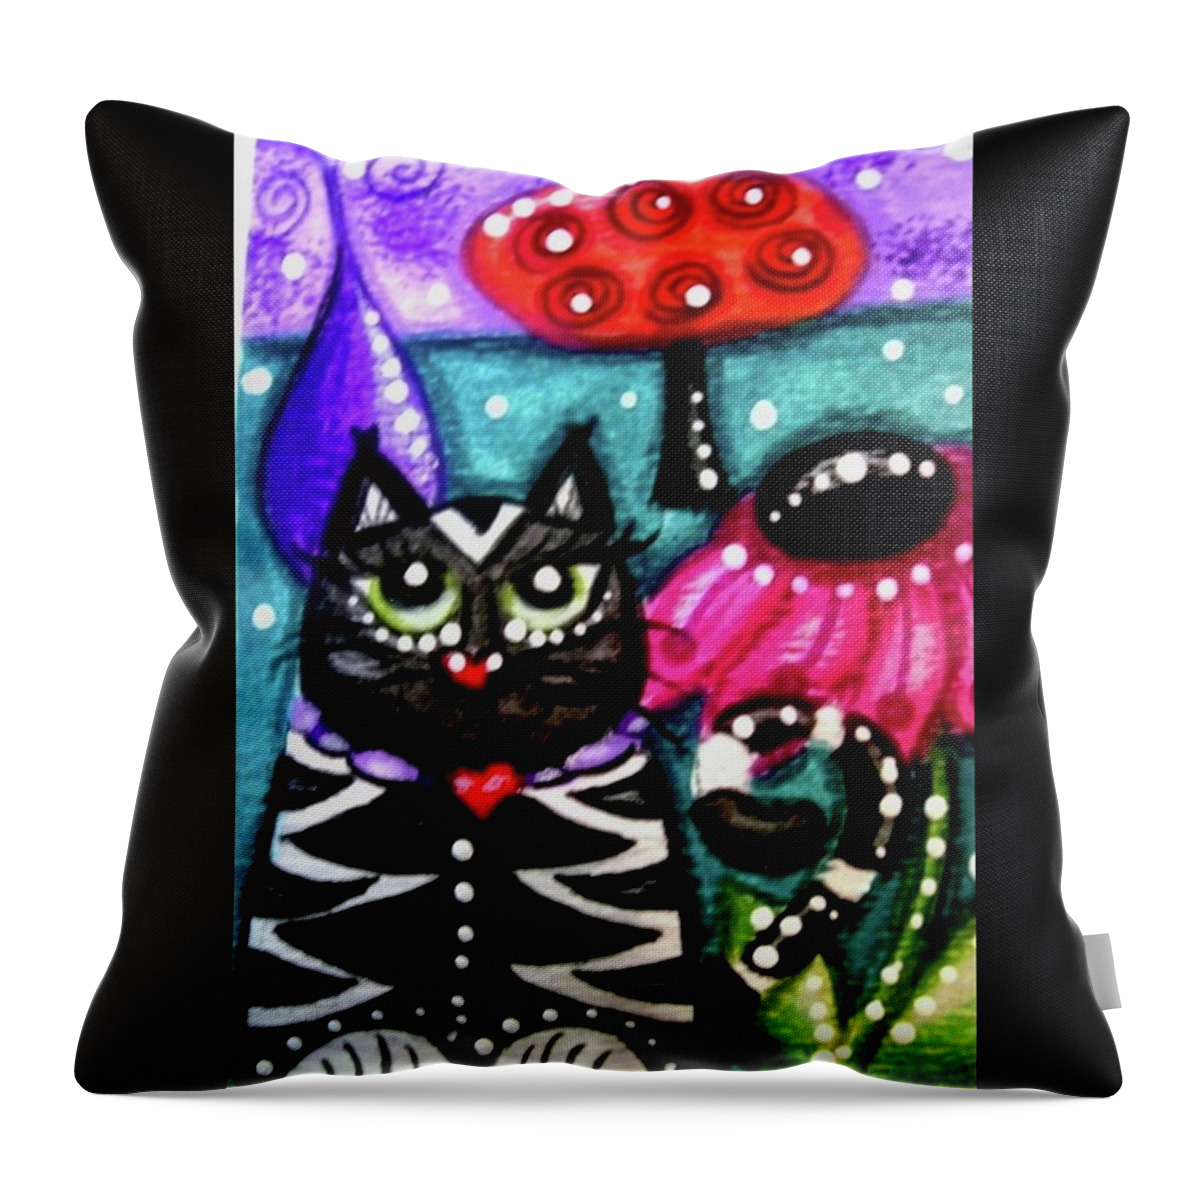 Kitty Throw Pillow featuring the painting Whimsical Black White Kitty Cat by Monica Resinger